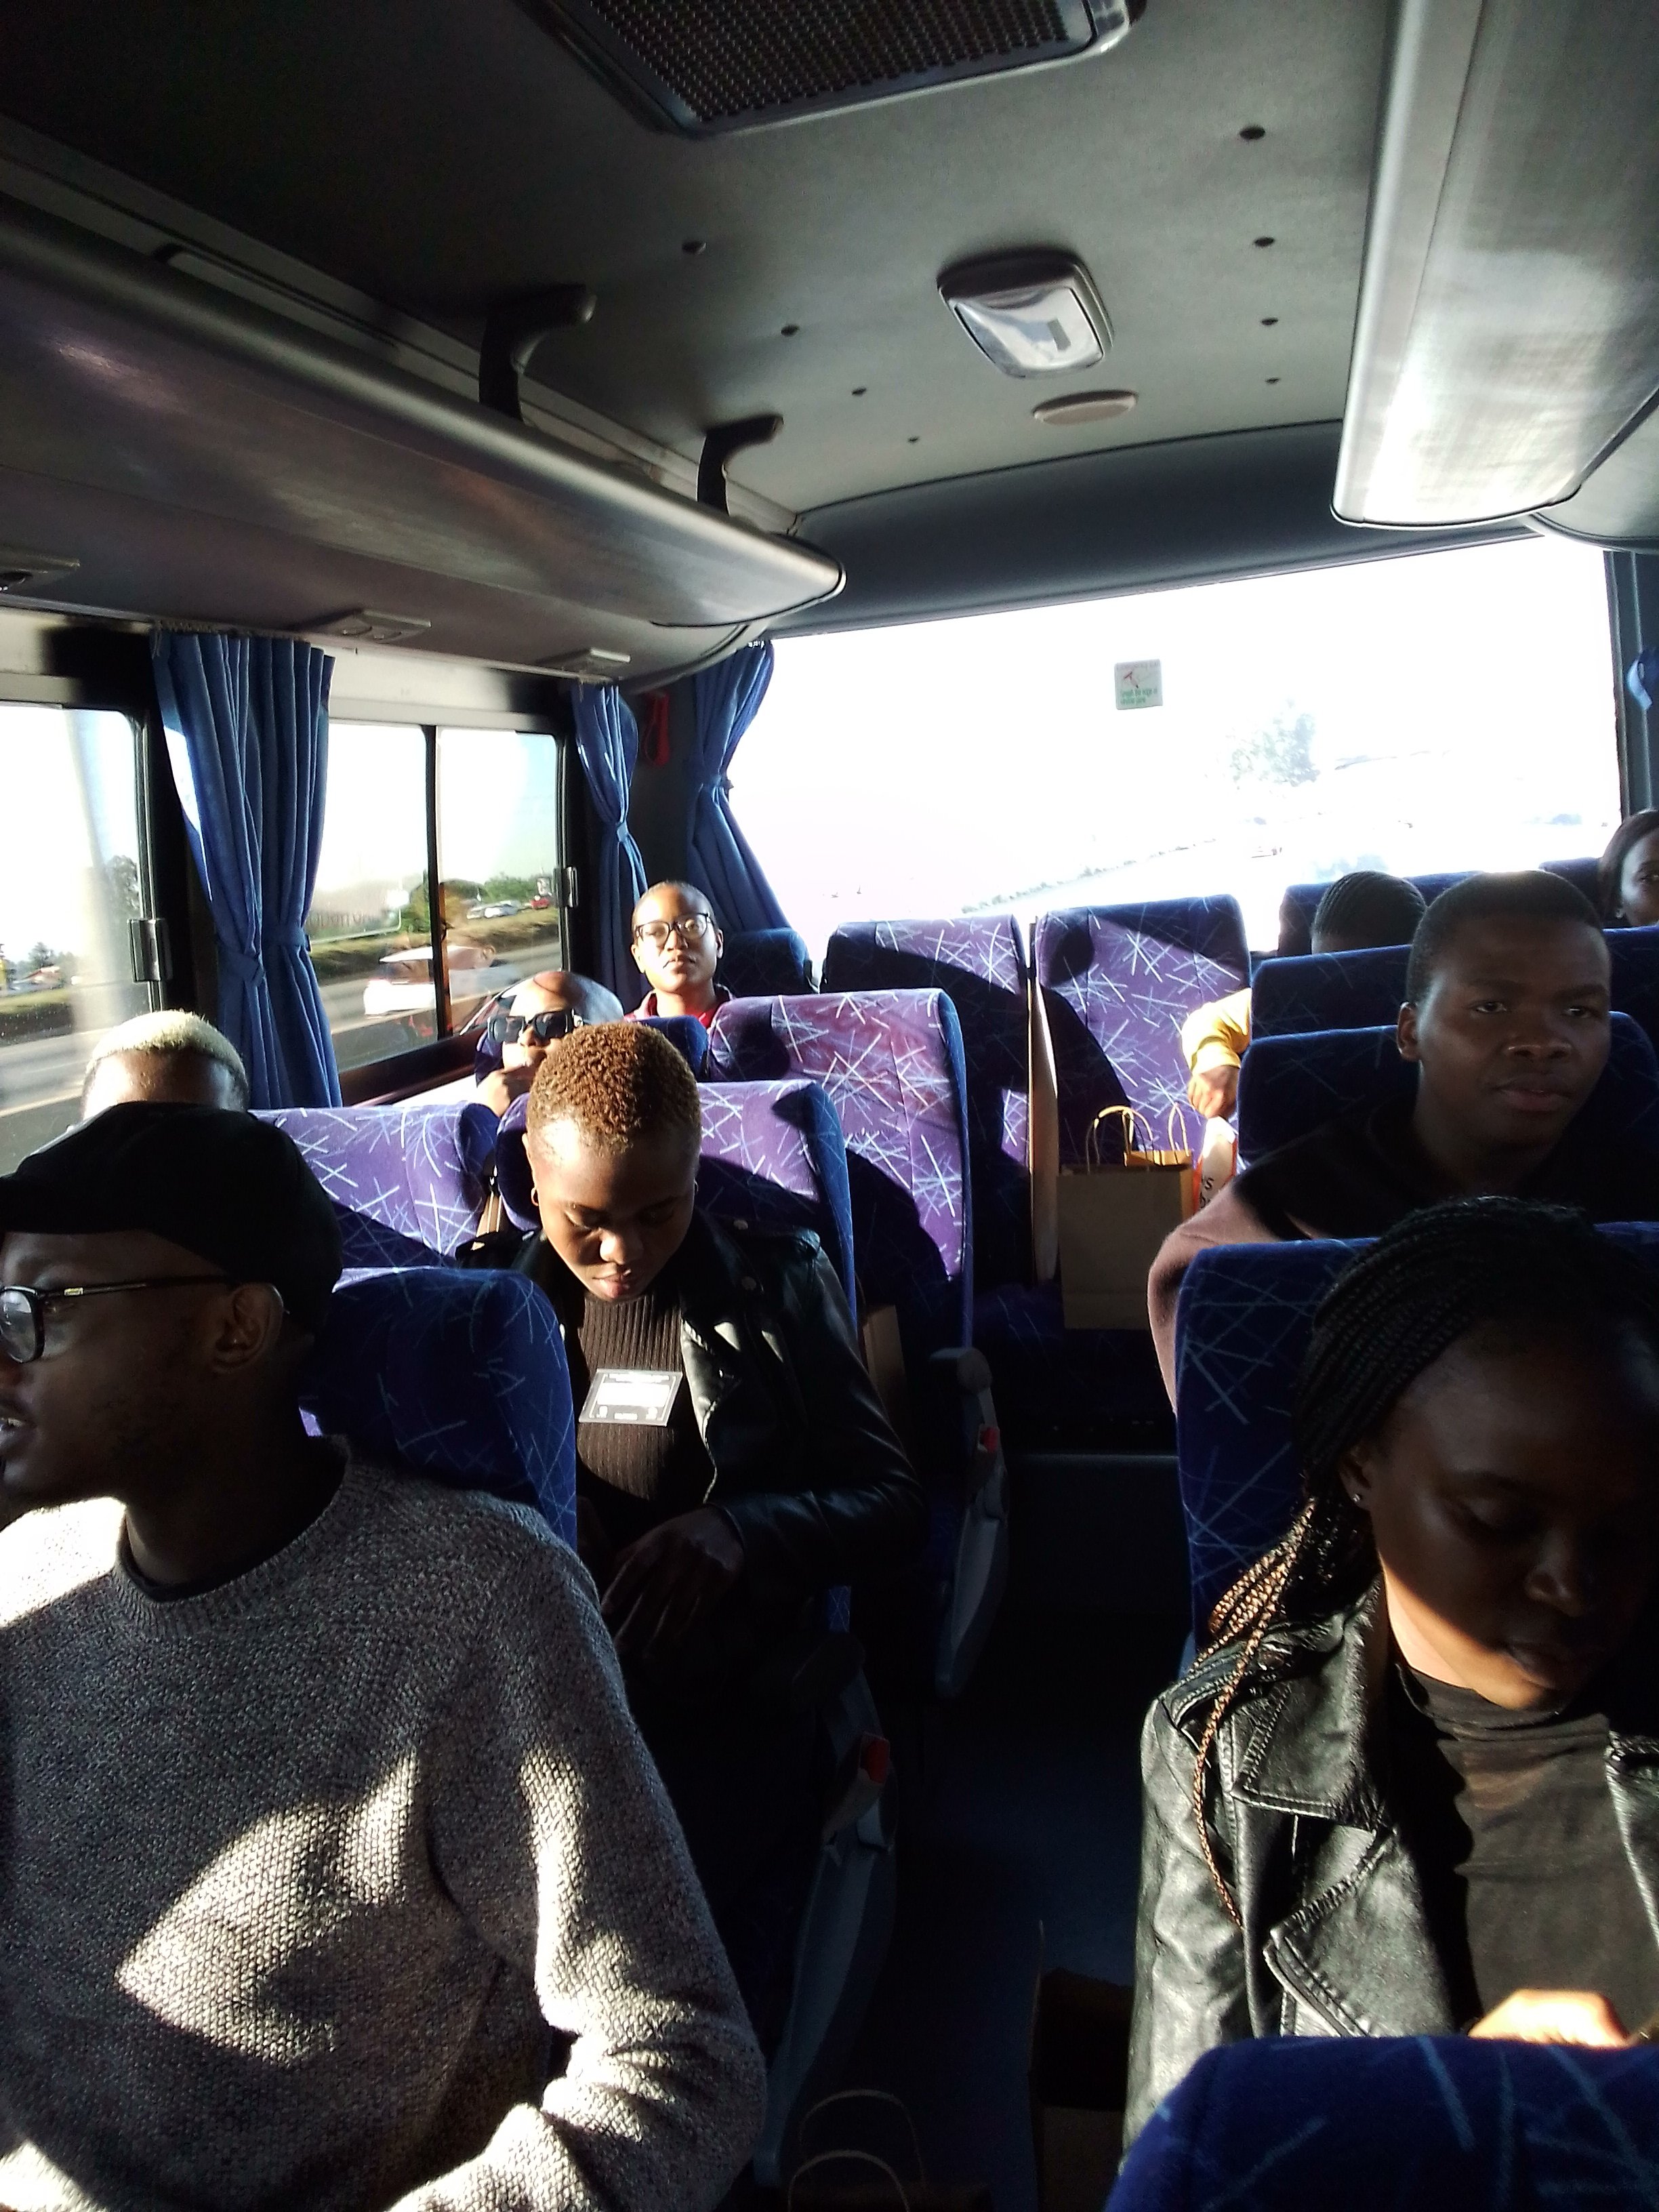  MJT Participants on the trip from Sandton to Gugulethu Colliery 